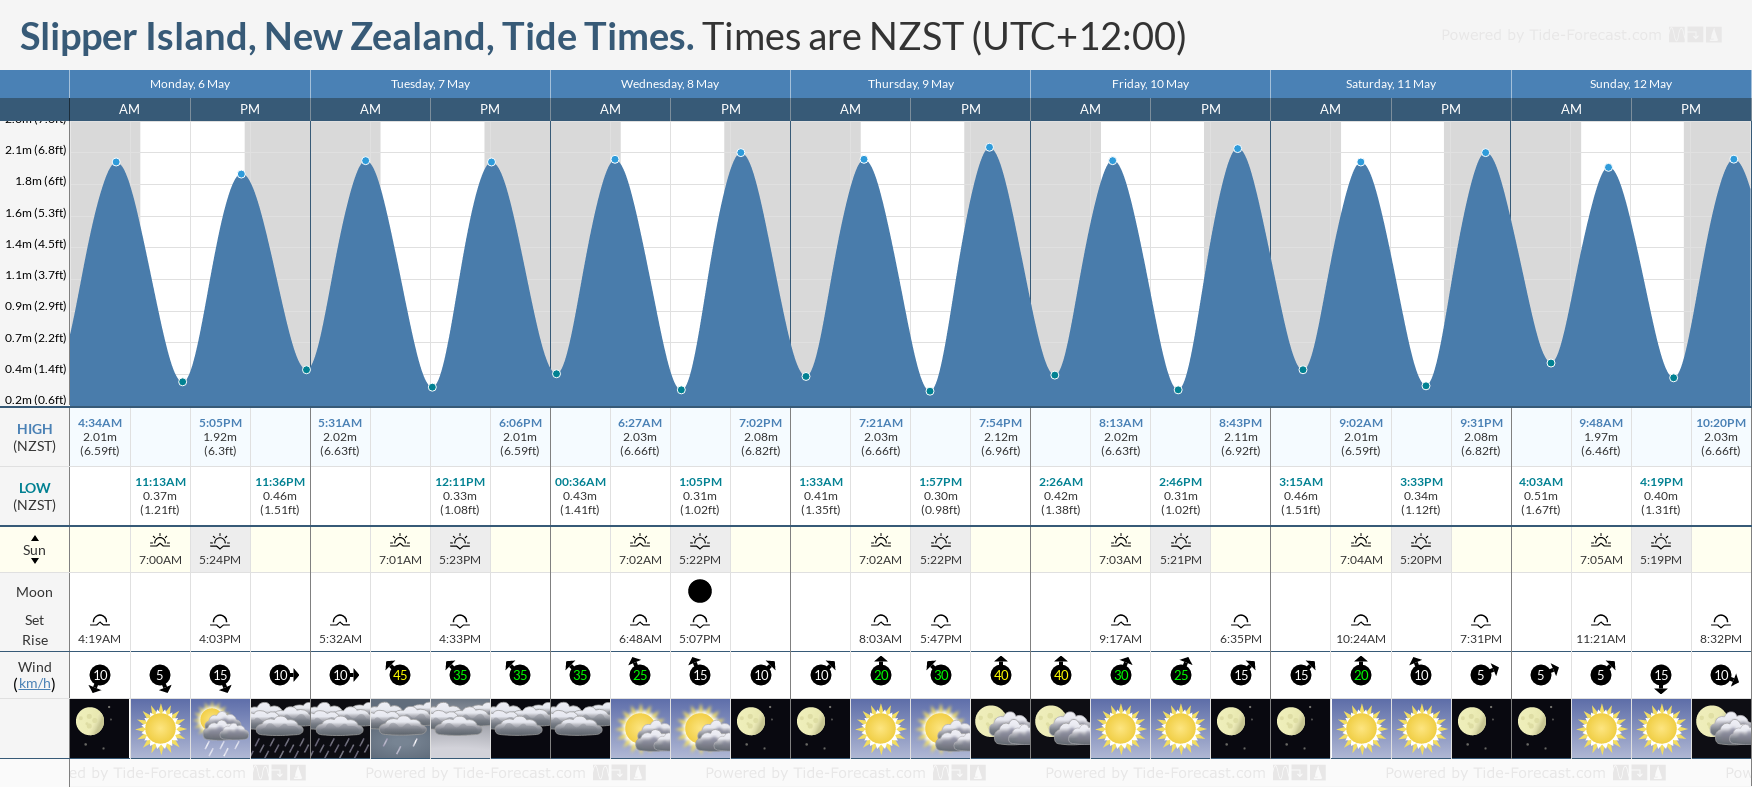 Slipper Island, New Zealand Tide Chart including high and low tide tide times for the next 7 days